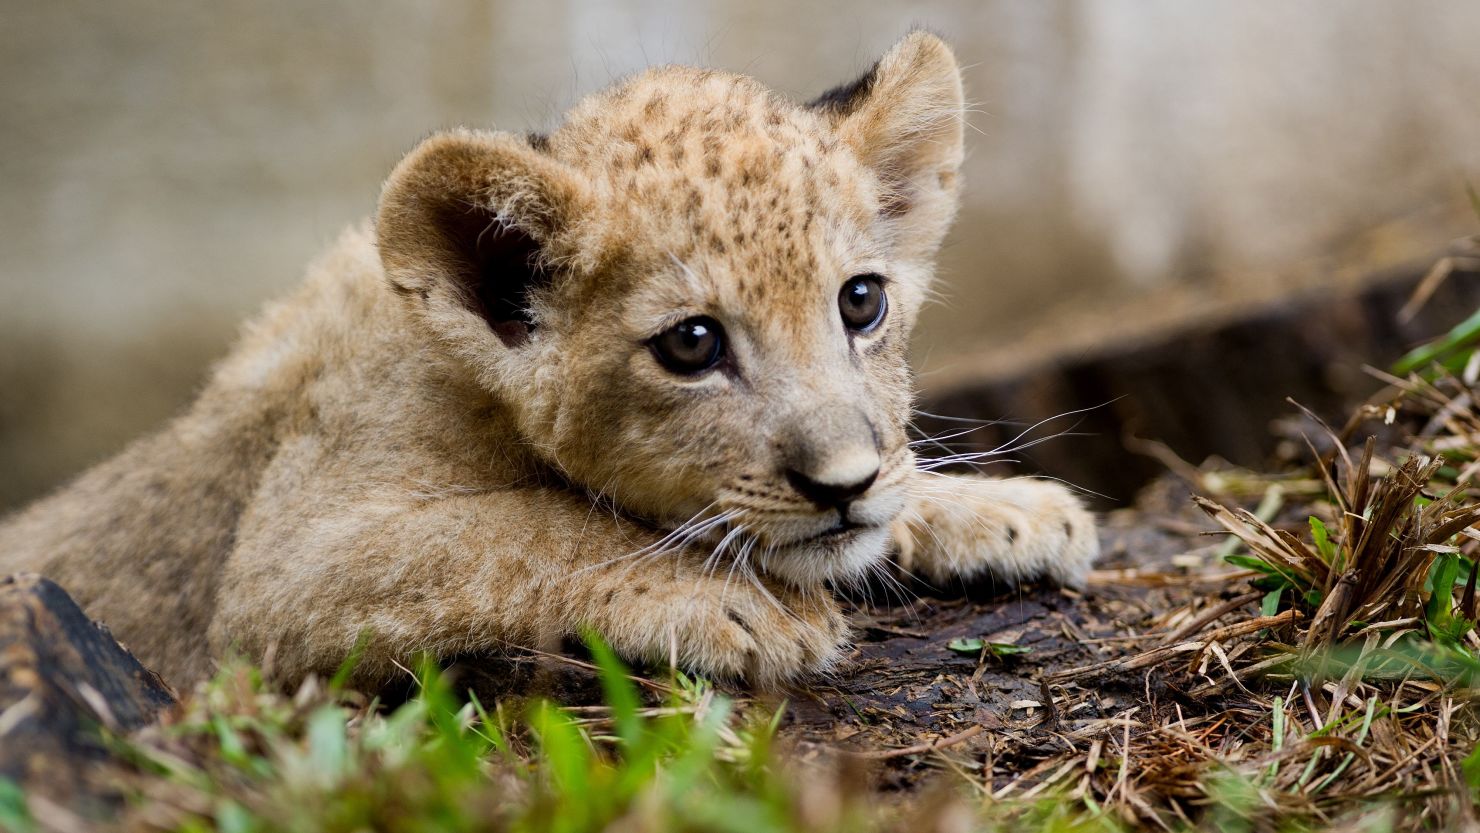 French police were alerted to the existence of the cub through videos circulating on social media. (File photo)